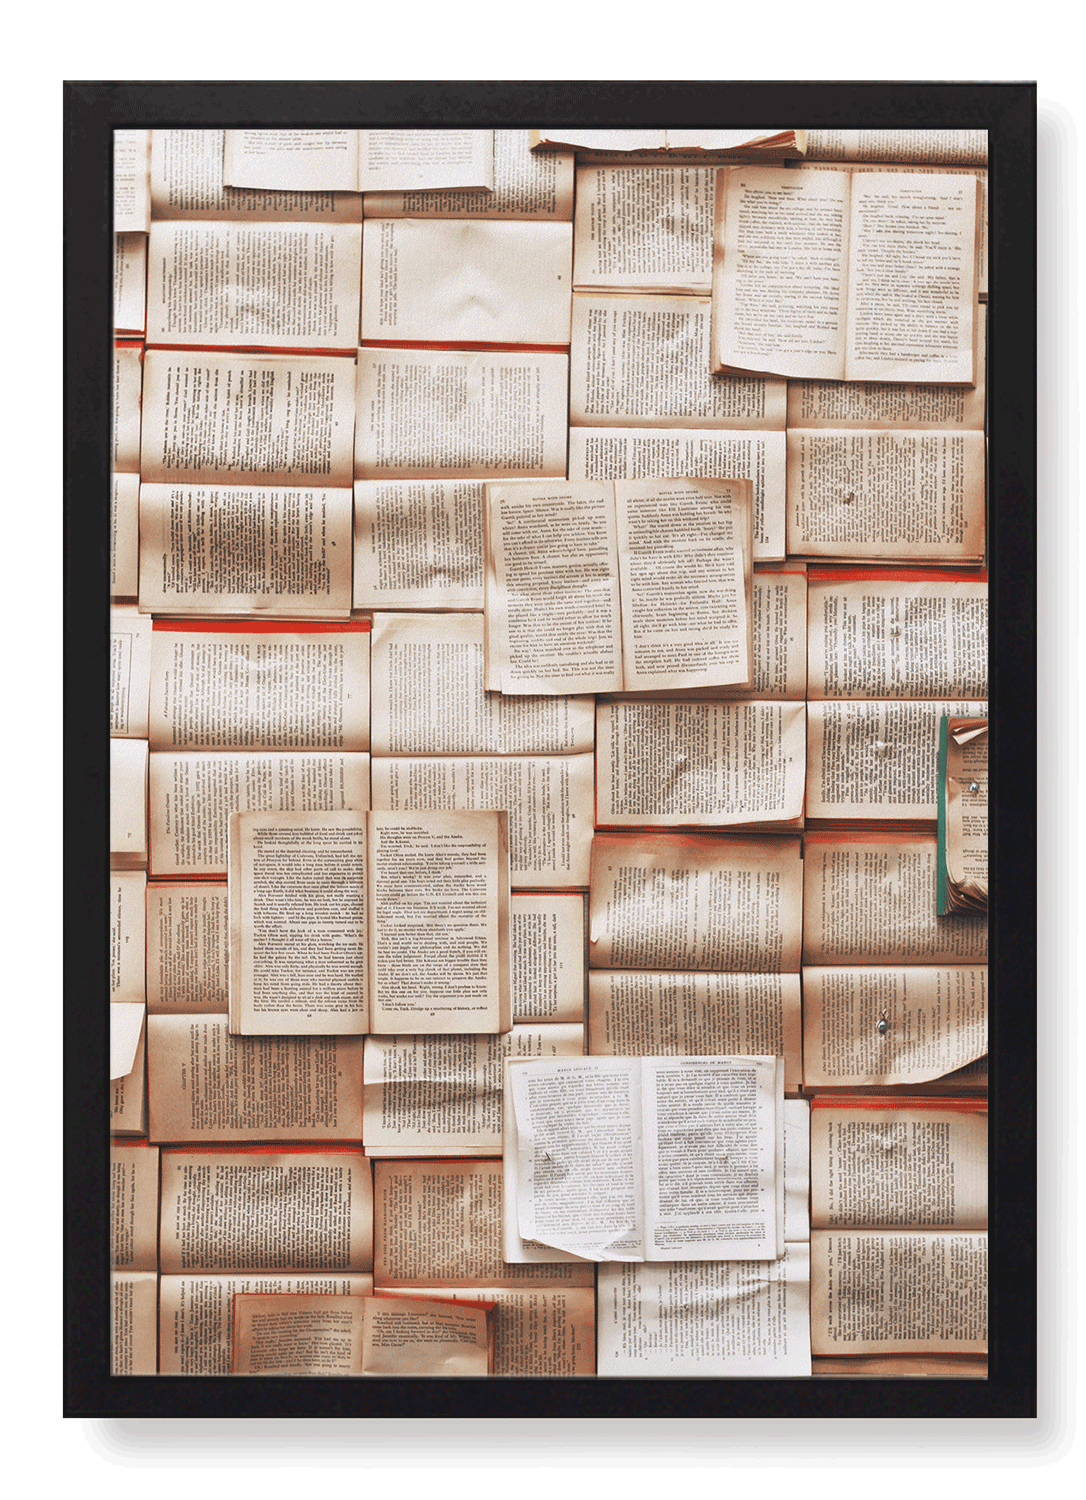 PAGES OF BOOKS